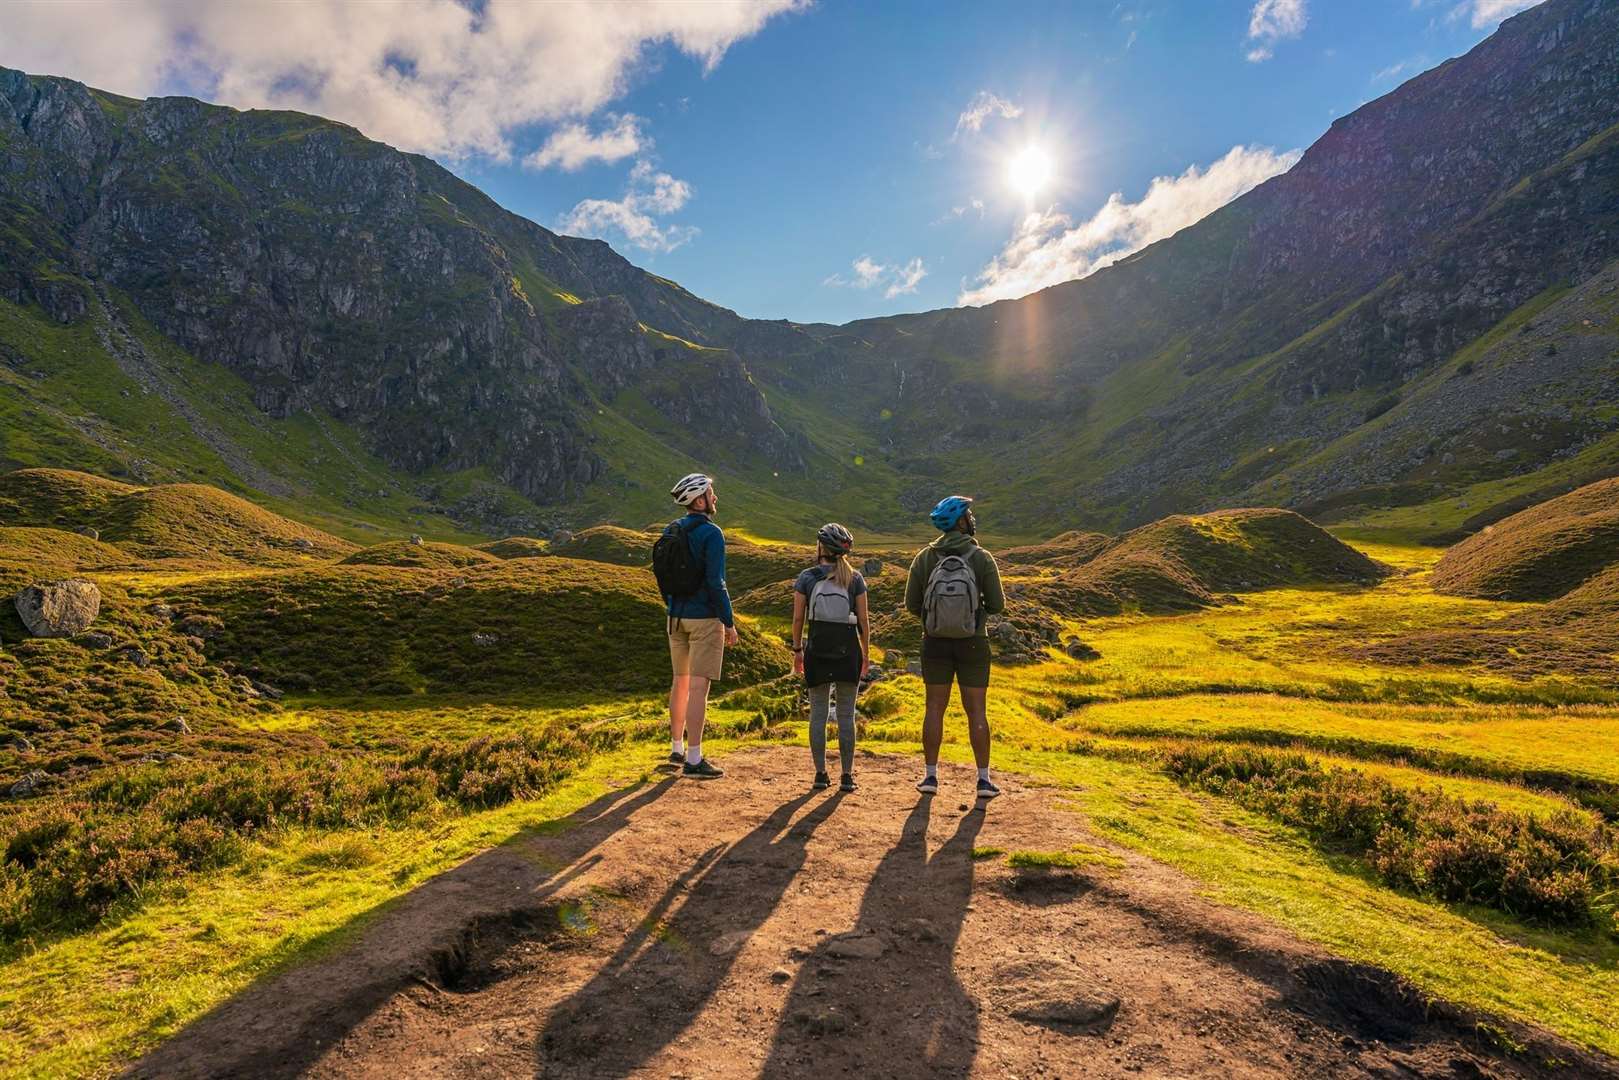 Enjoying Scotland's countryside responsibly is at the heart of a new VisitScotland campaign.